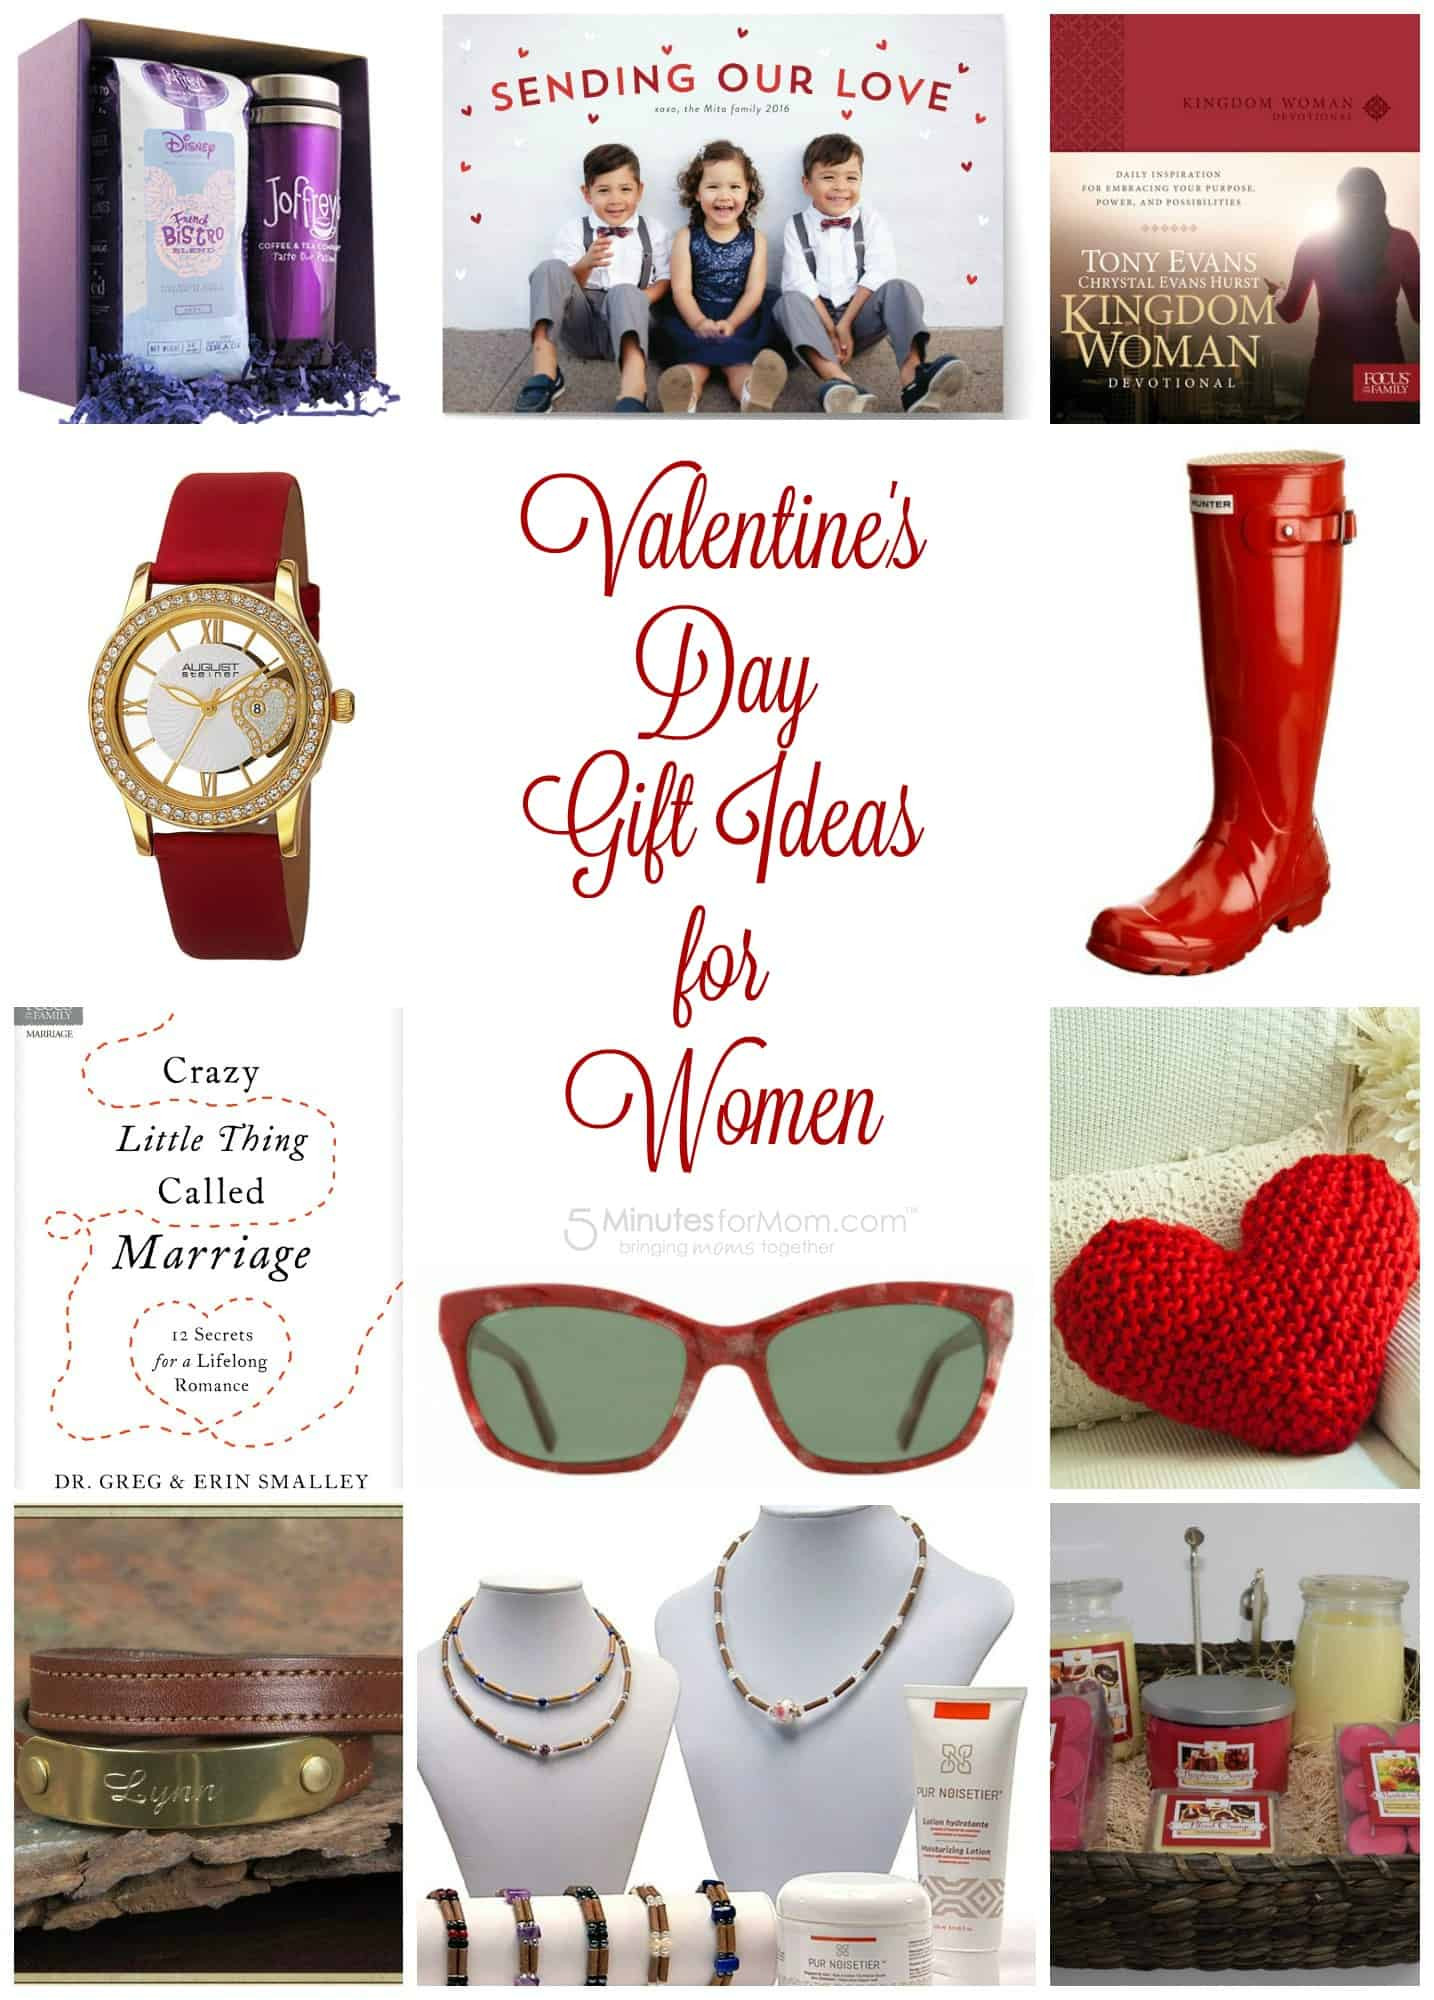 Valentine Gift Ideas For Girls
 Valentine s Day Gift Guide for Women Plus $100 Amazon